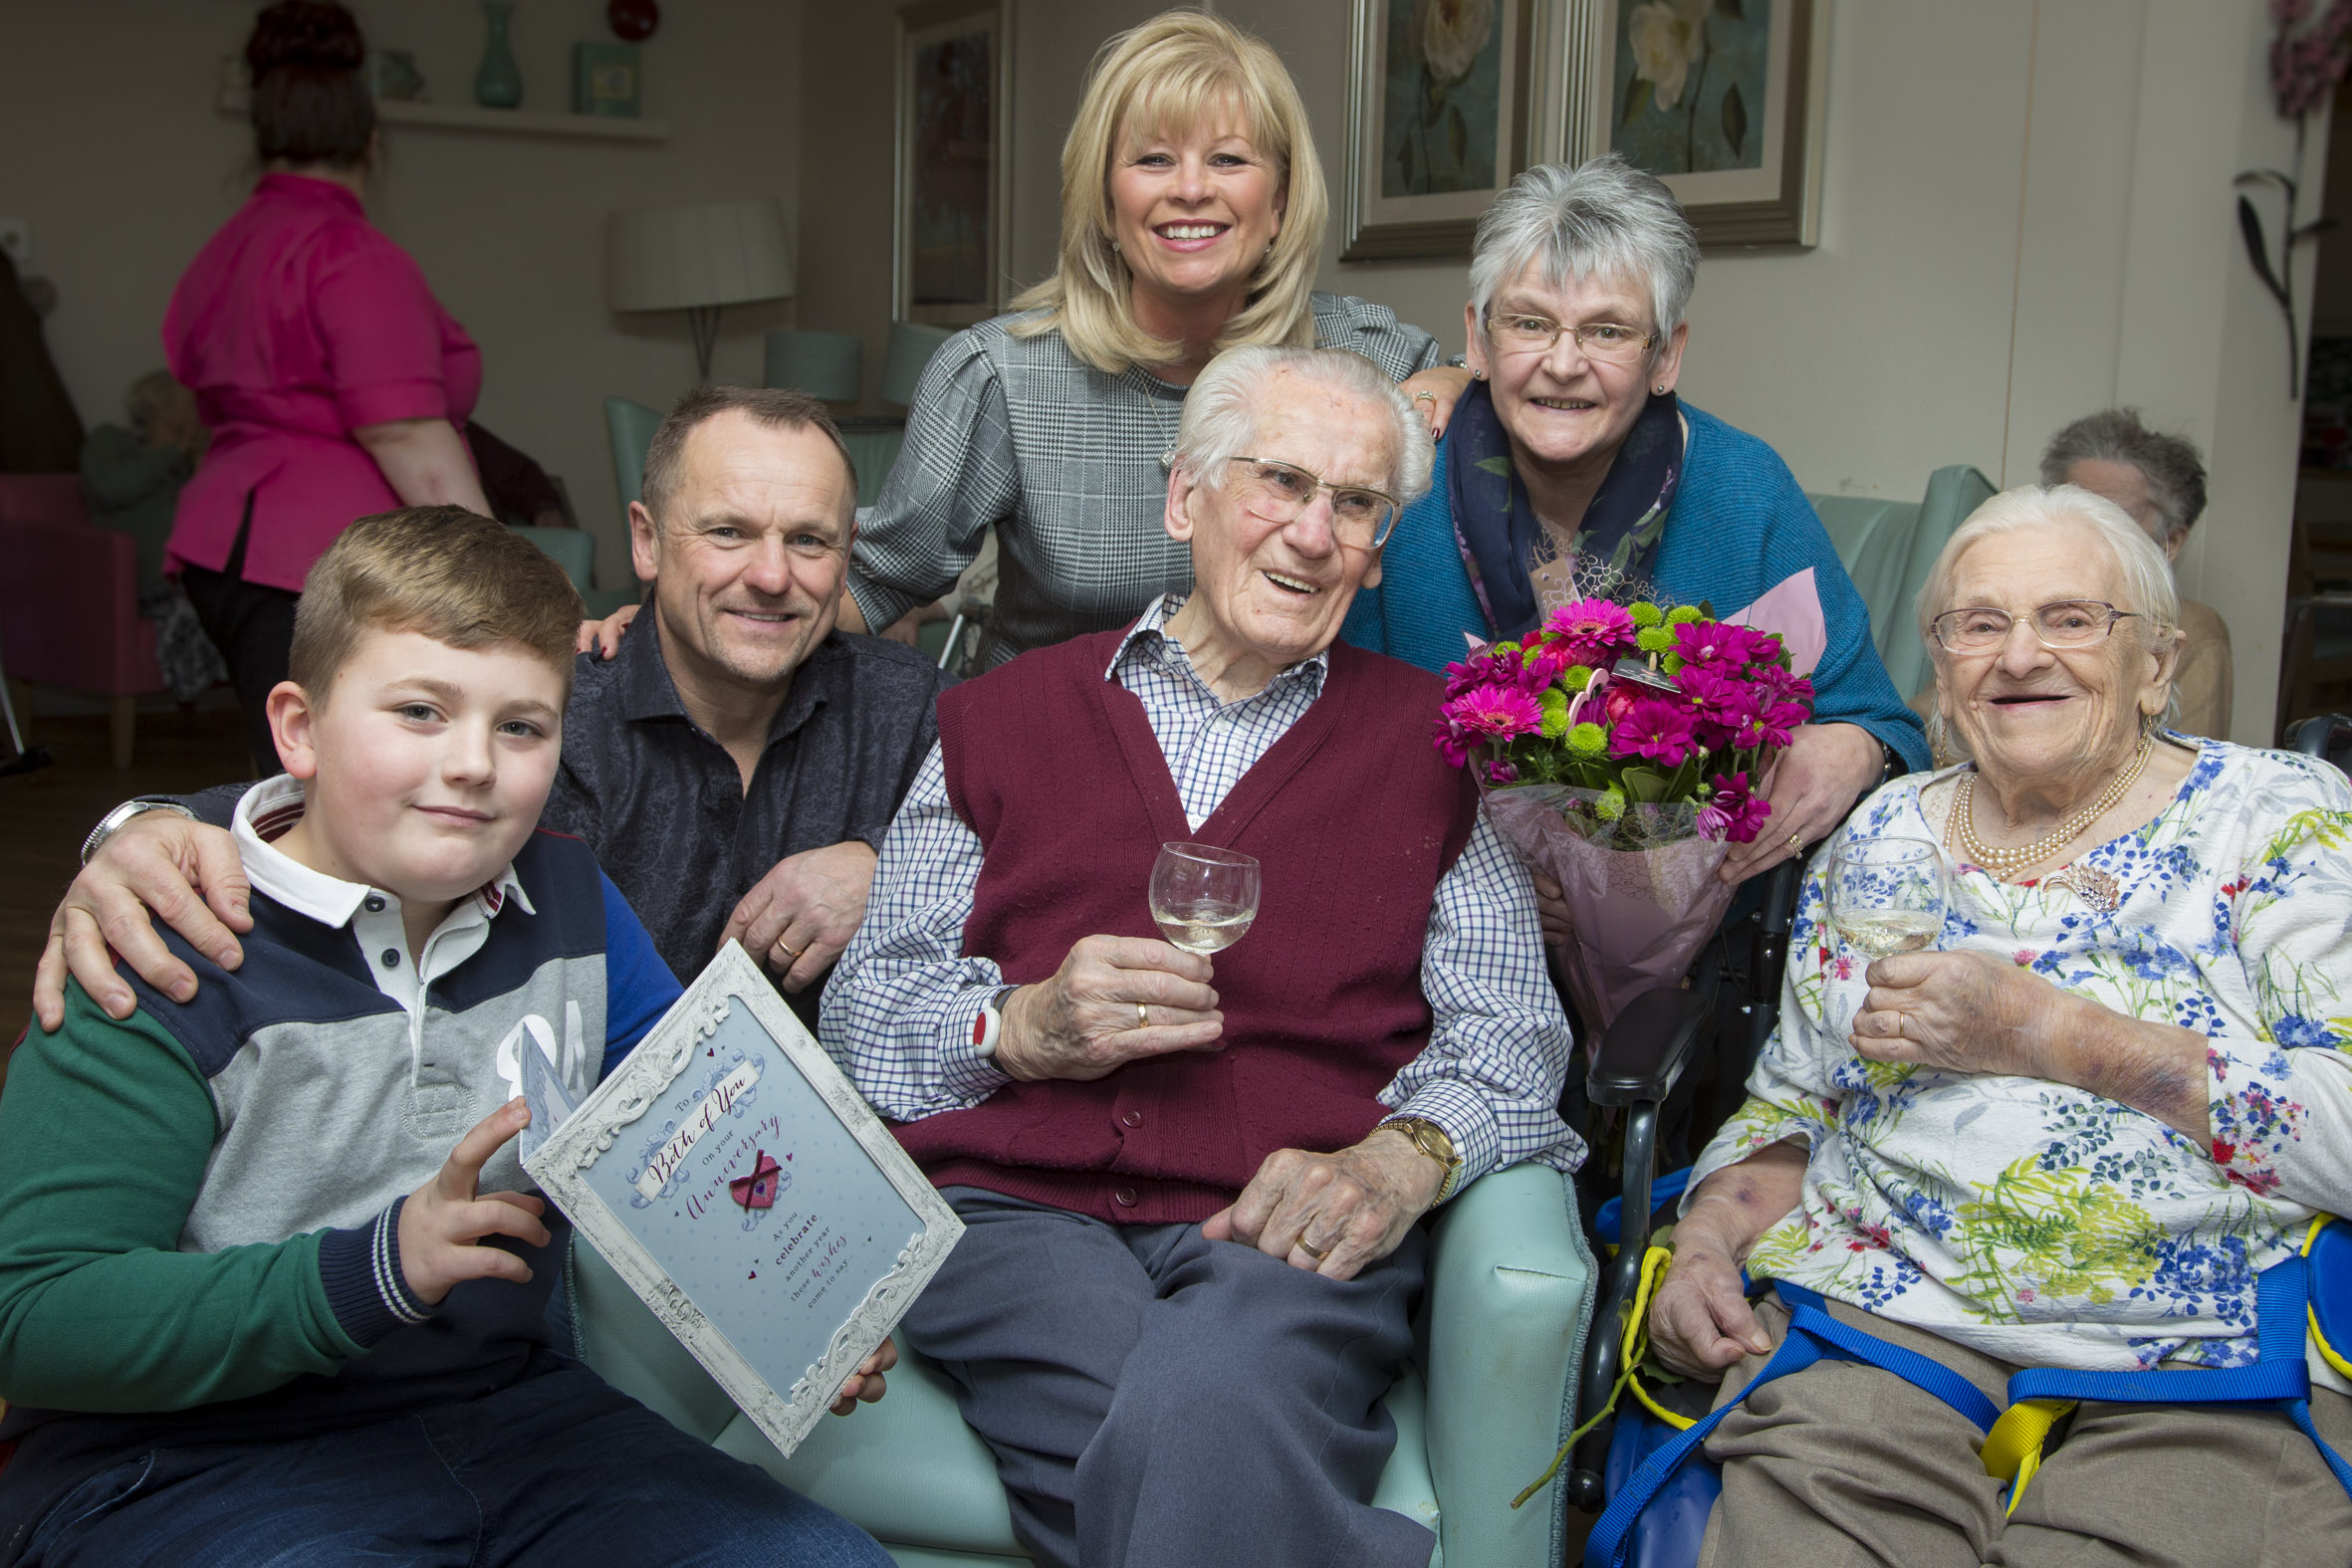 Ern and Gwyneth still utterly devoted after 70 years of wedded bliss